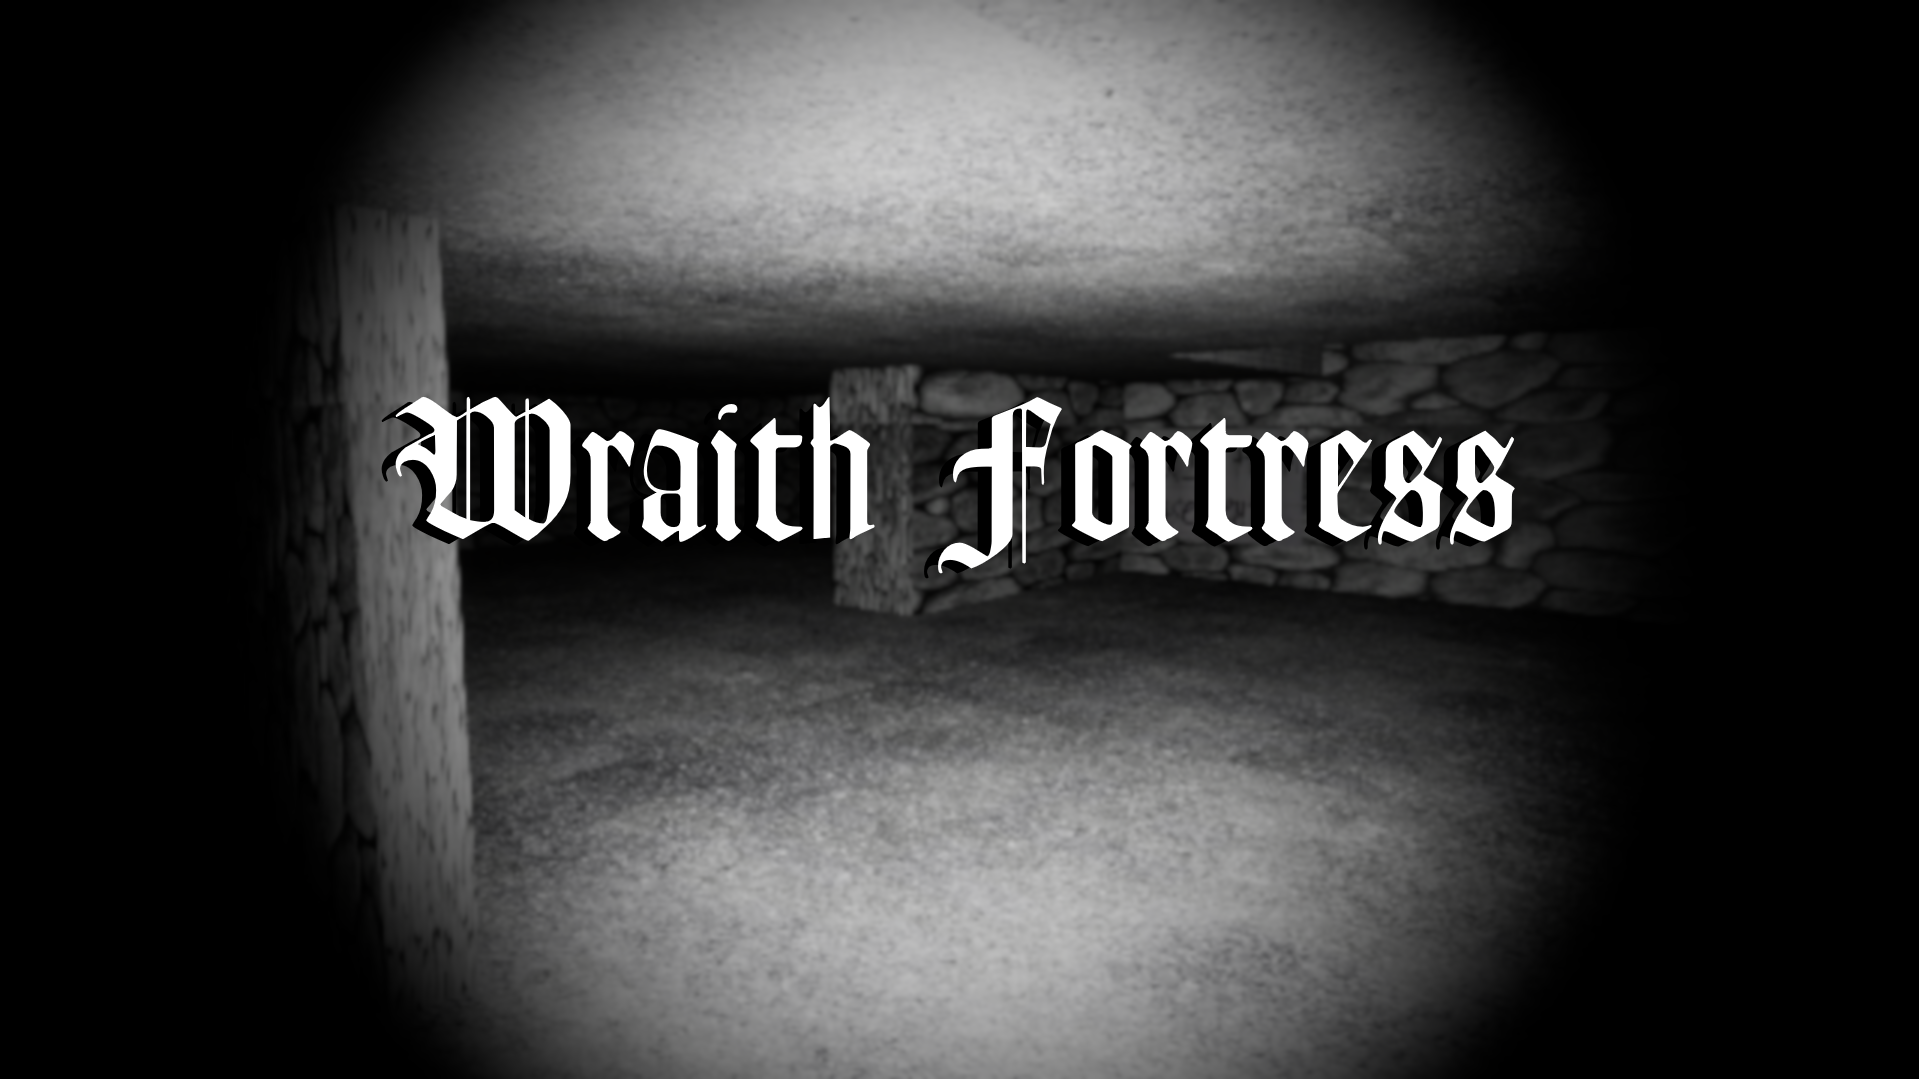 Wraith Fortress